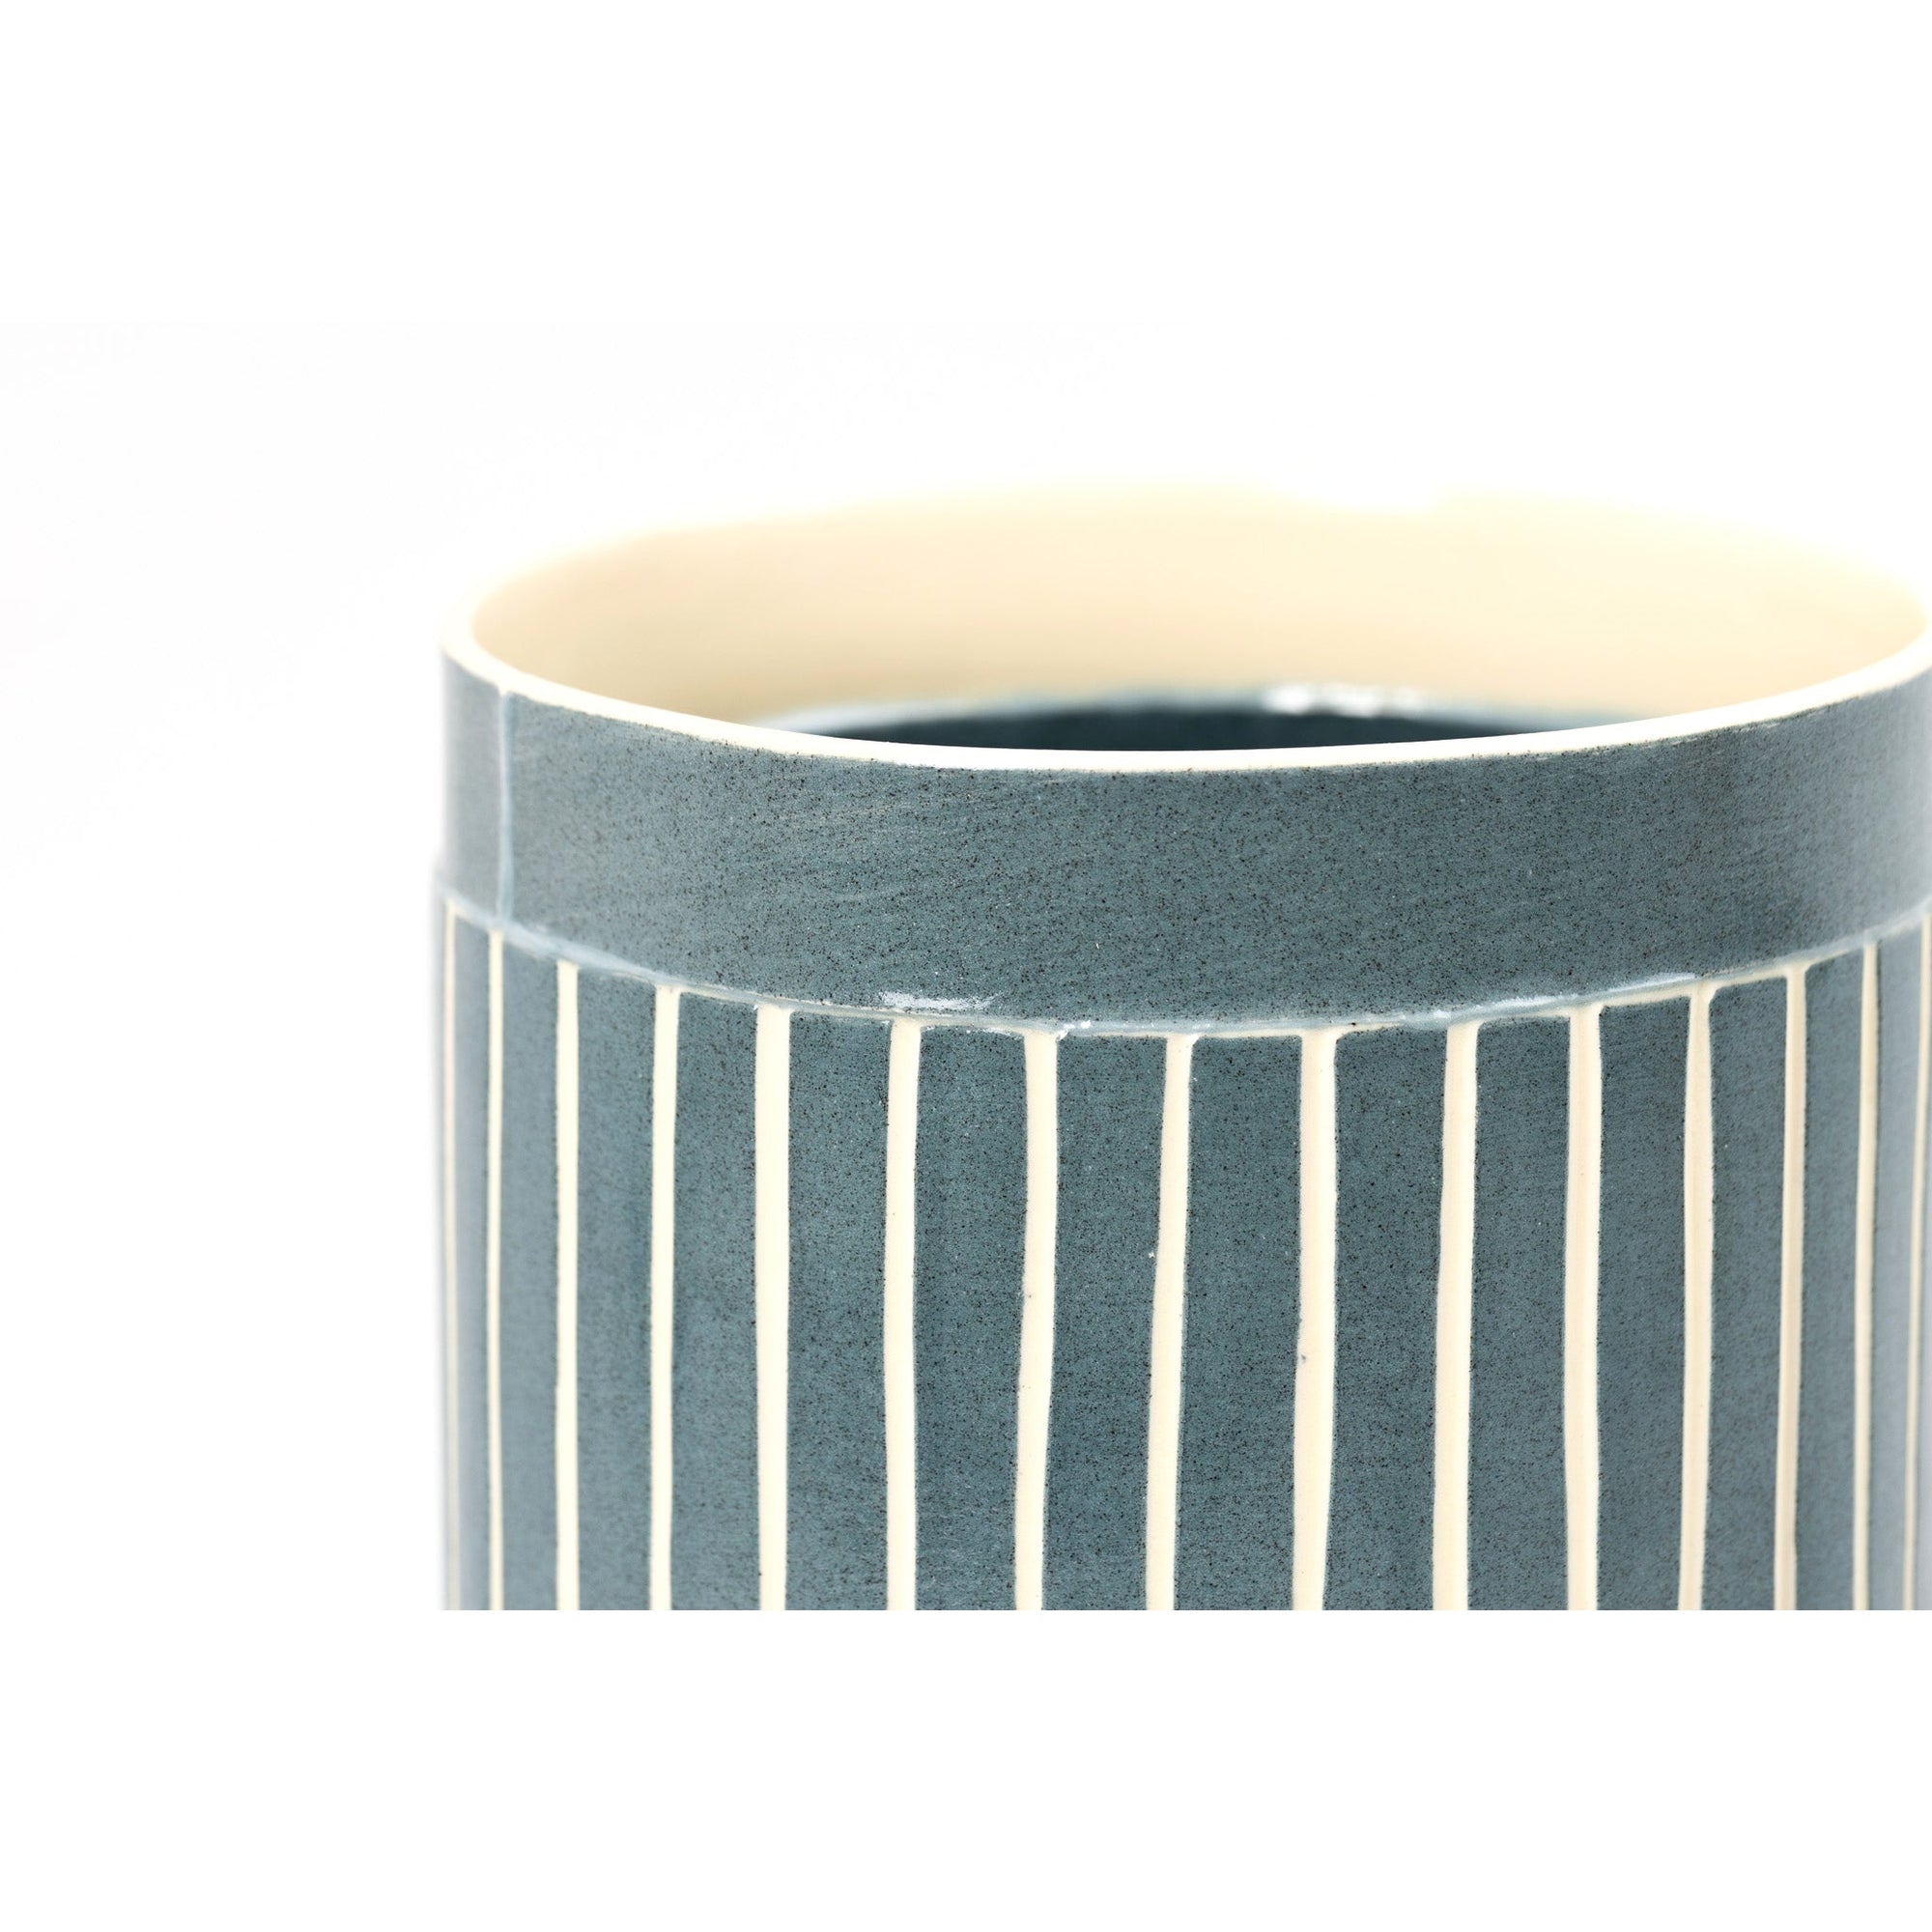 MR16 Mid Round Vessel, handbuilt ceramic created by Emily-Kriste Wilcox, available from Padstow Gallery, Cornwall